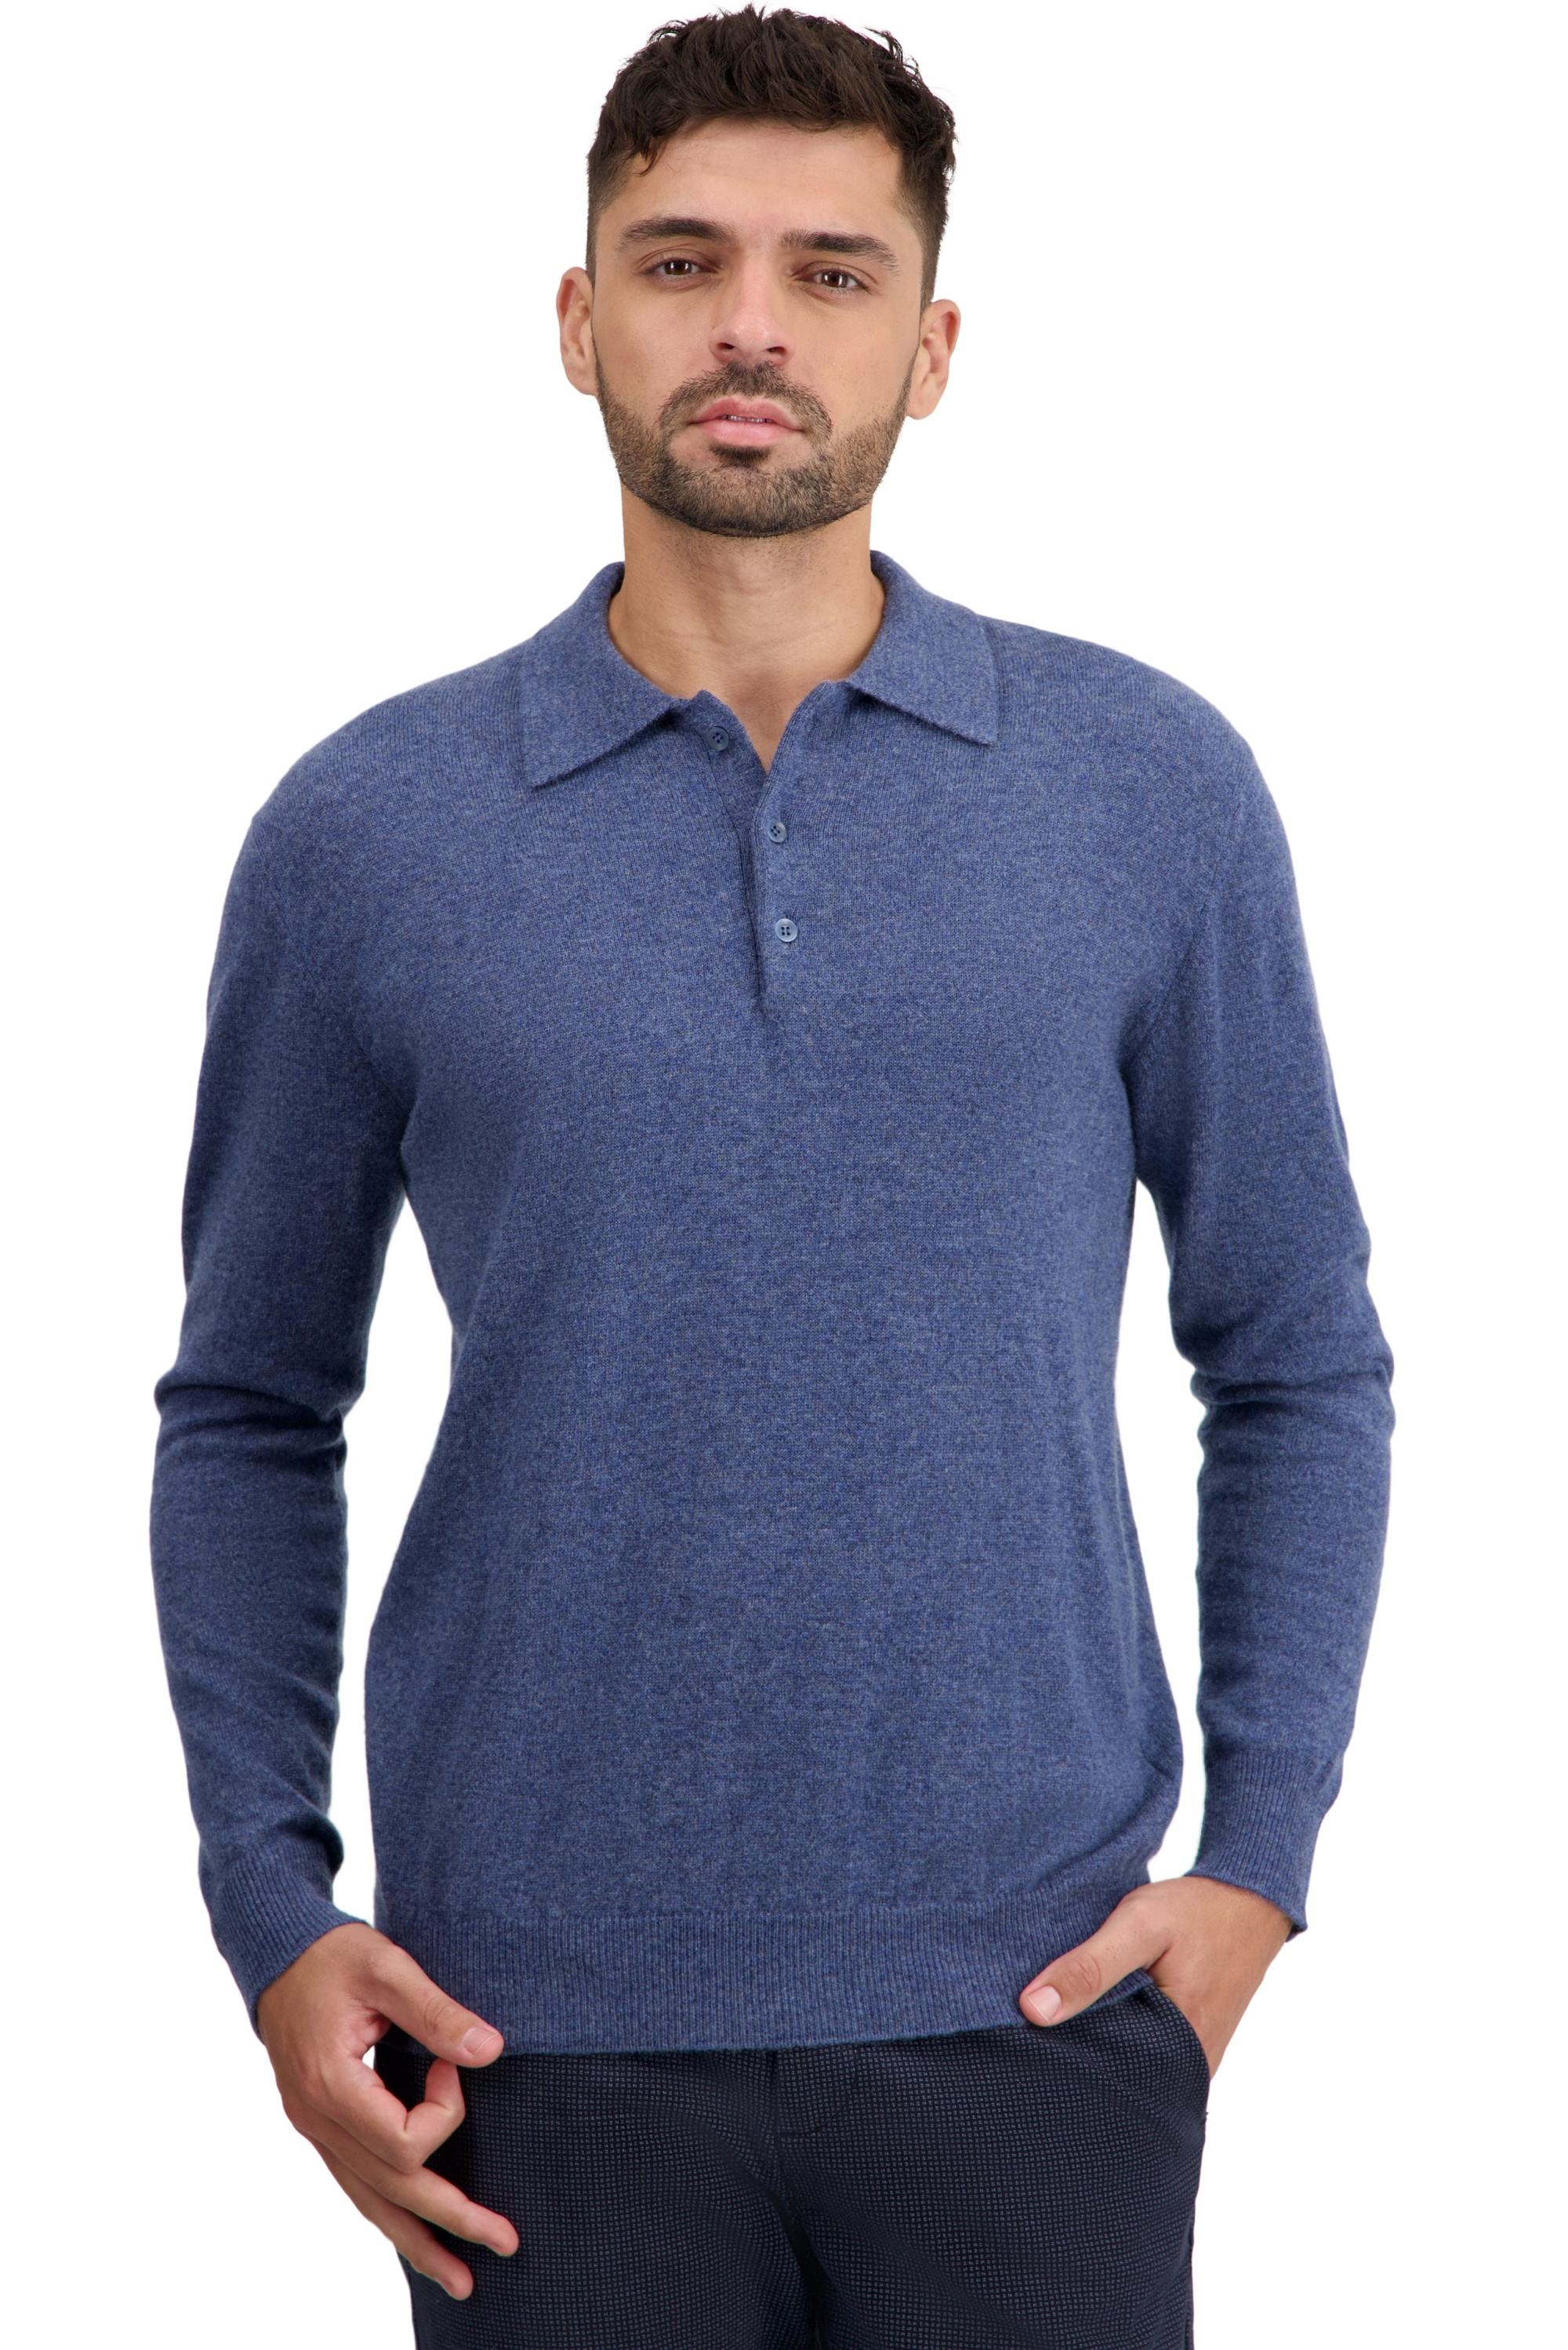 Cachemire petits prix homme tarn first nordic blue 3xl